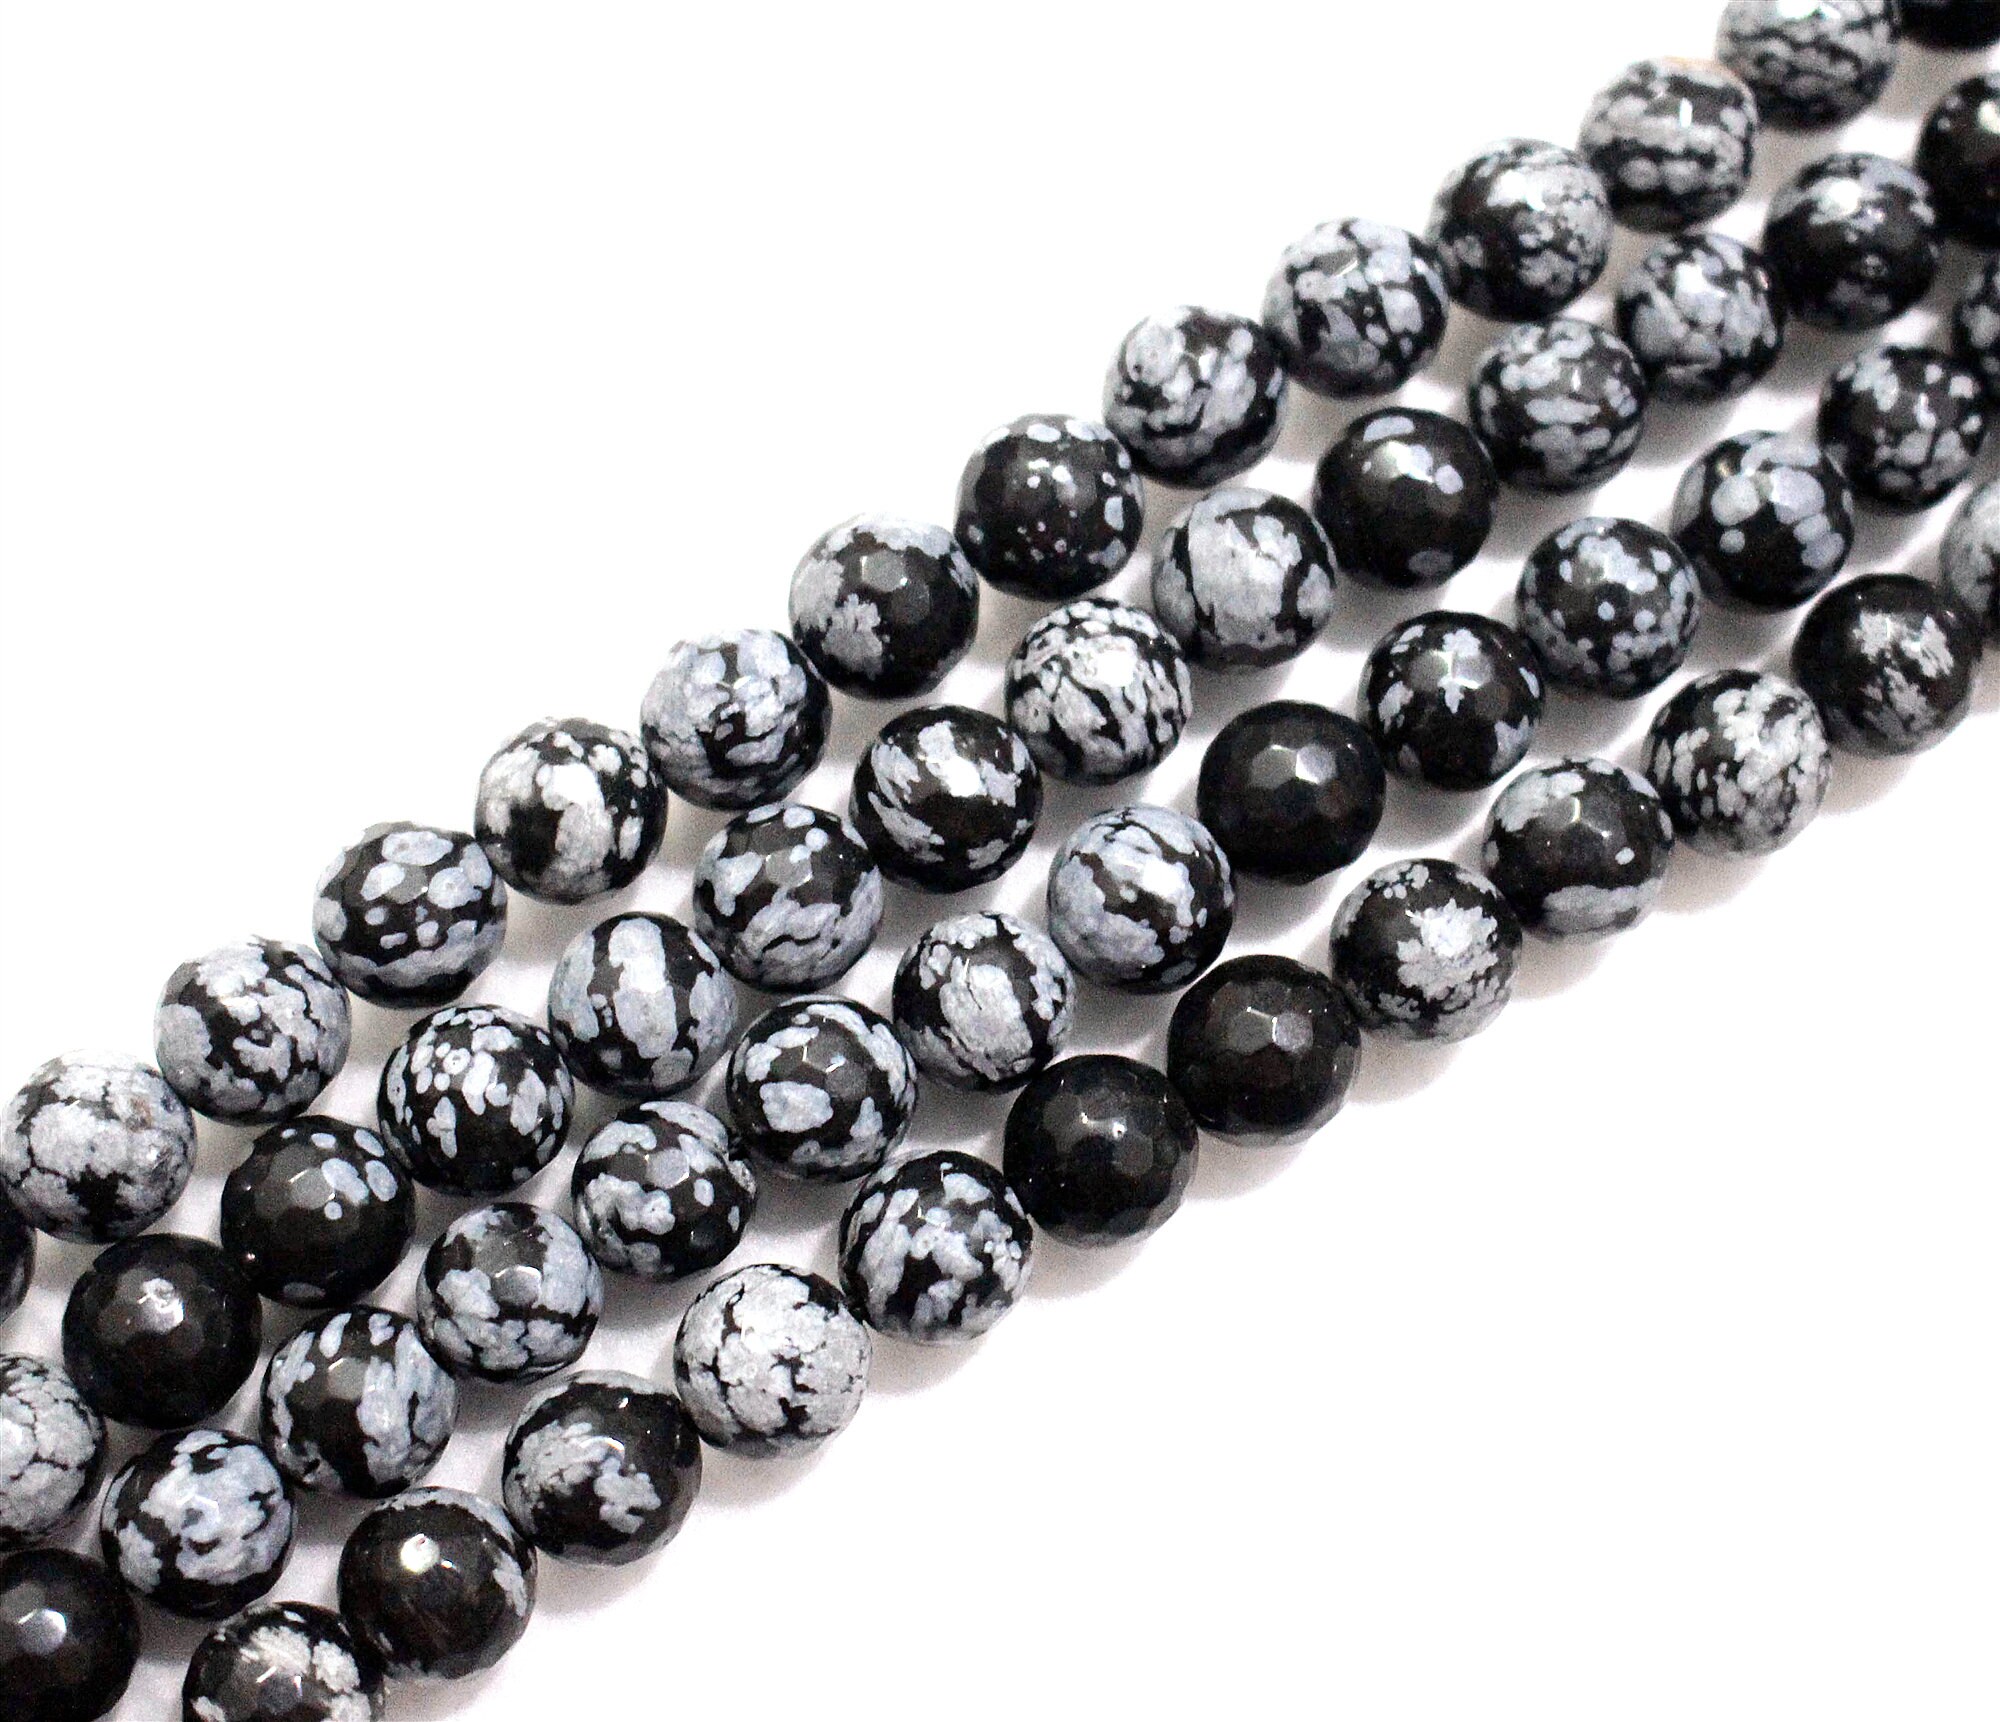 Natural Snow Flake Obsidian Gemstone Round Beads 15'' 4mm 6mm 8mm 10mm 12mm 